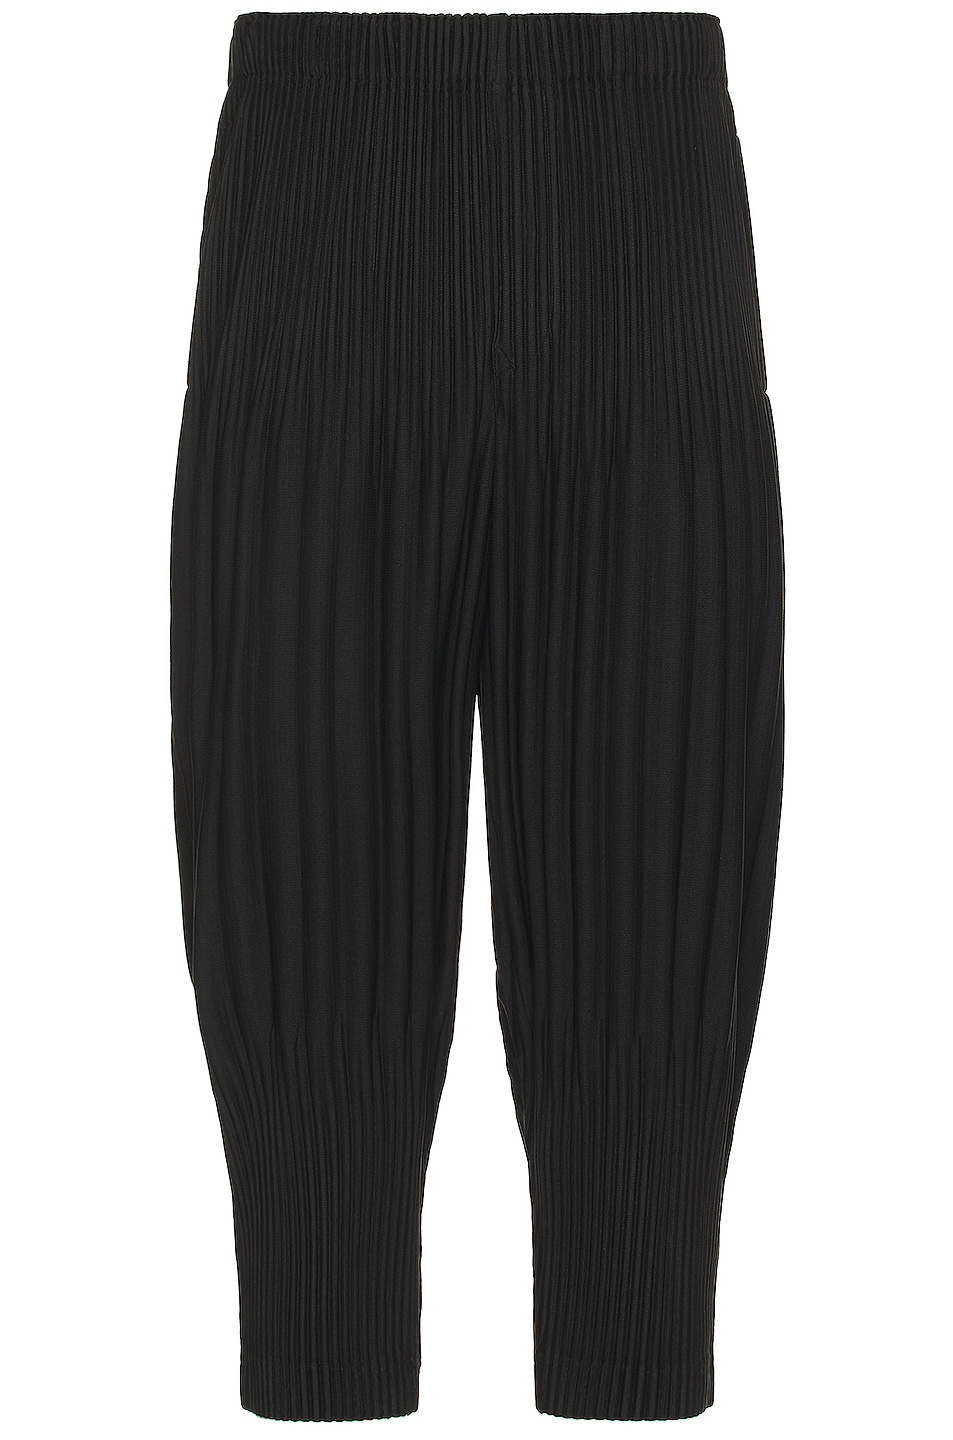 Image 1 of Homme Plisse Issey Miyake Basics Relaxed Pant in Black